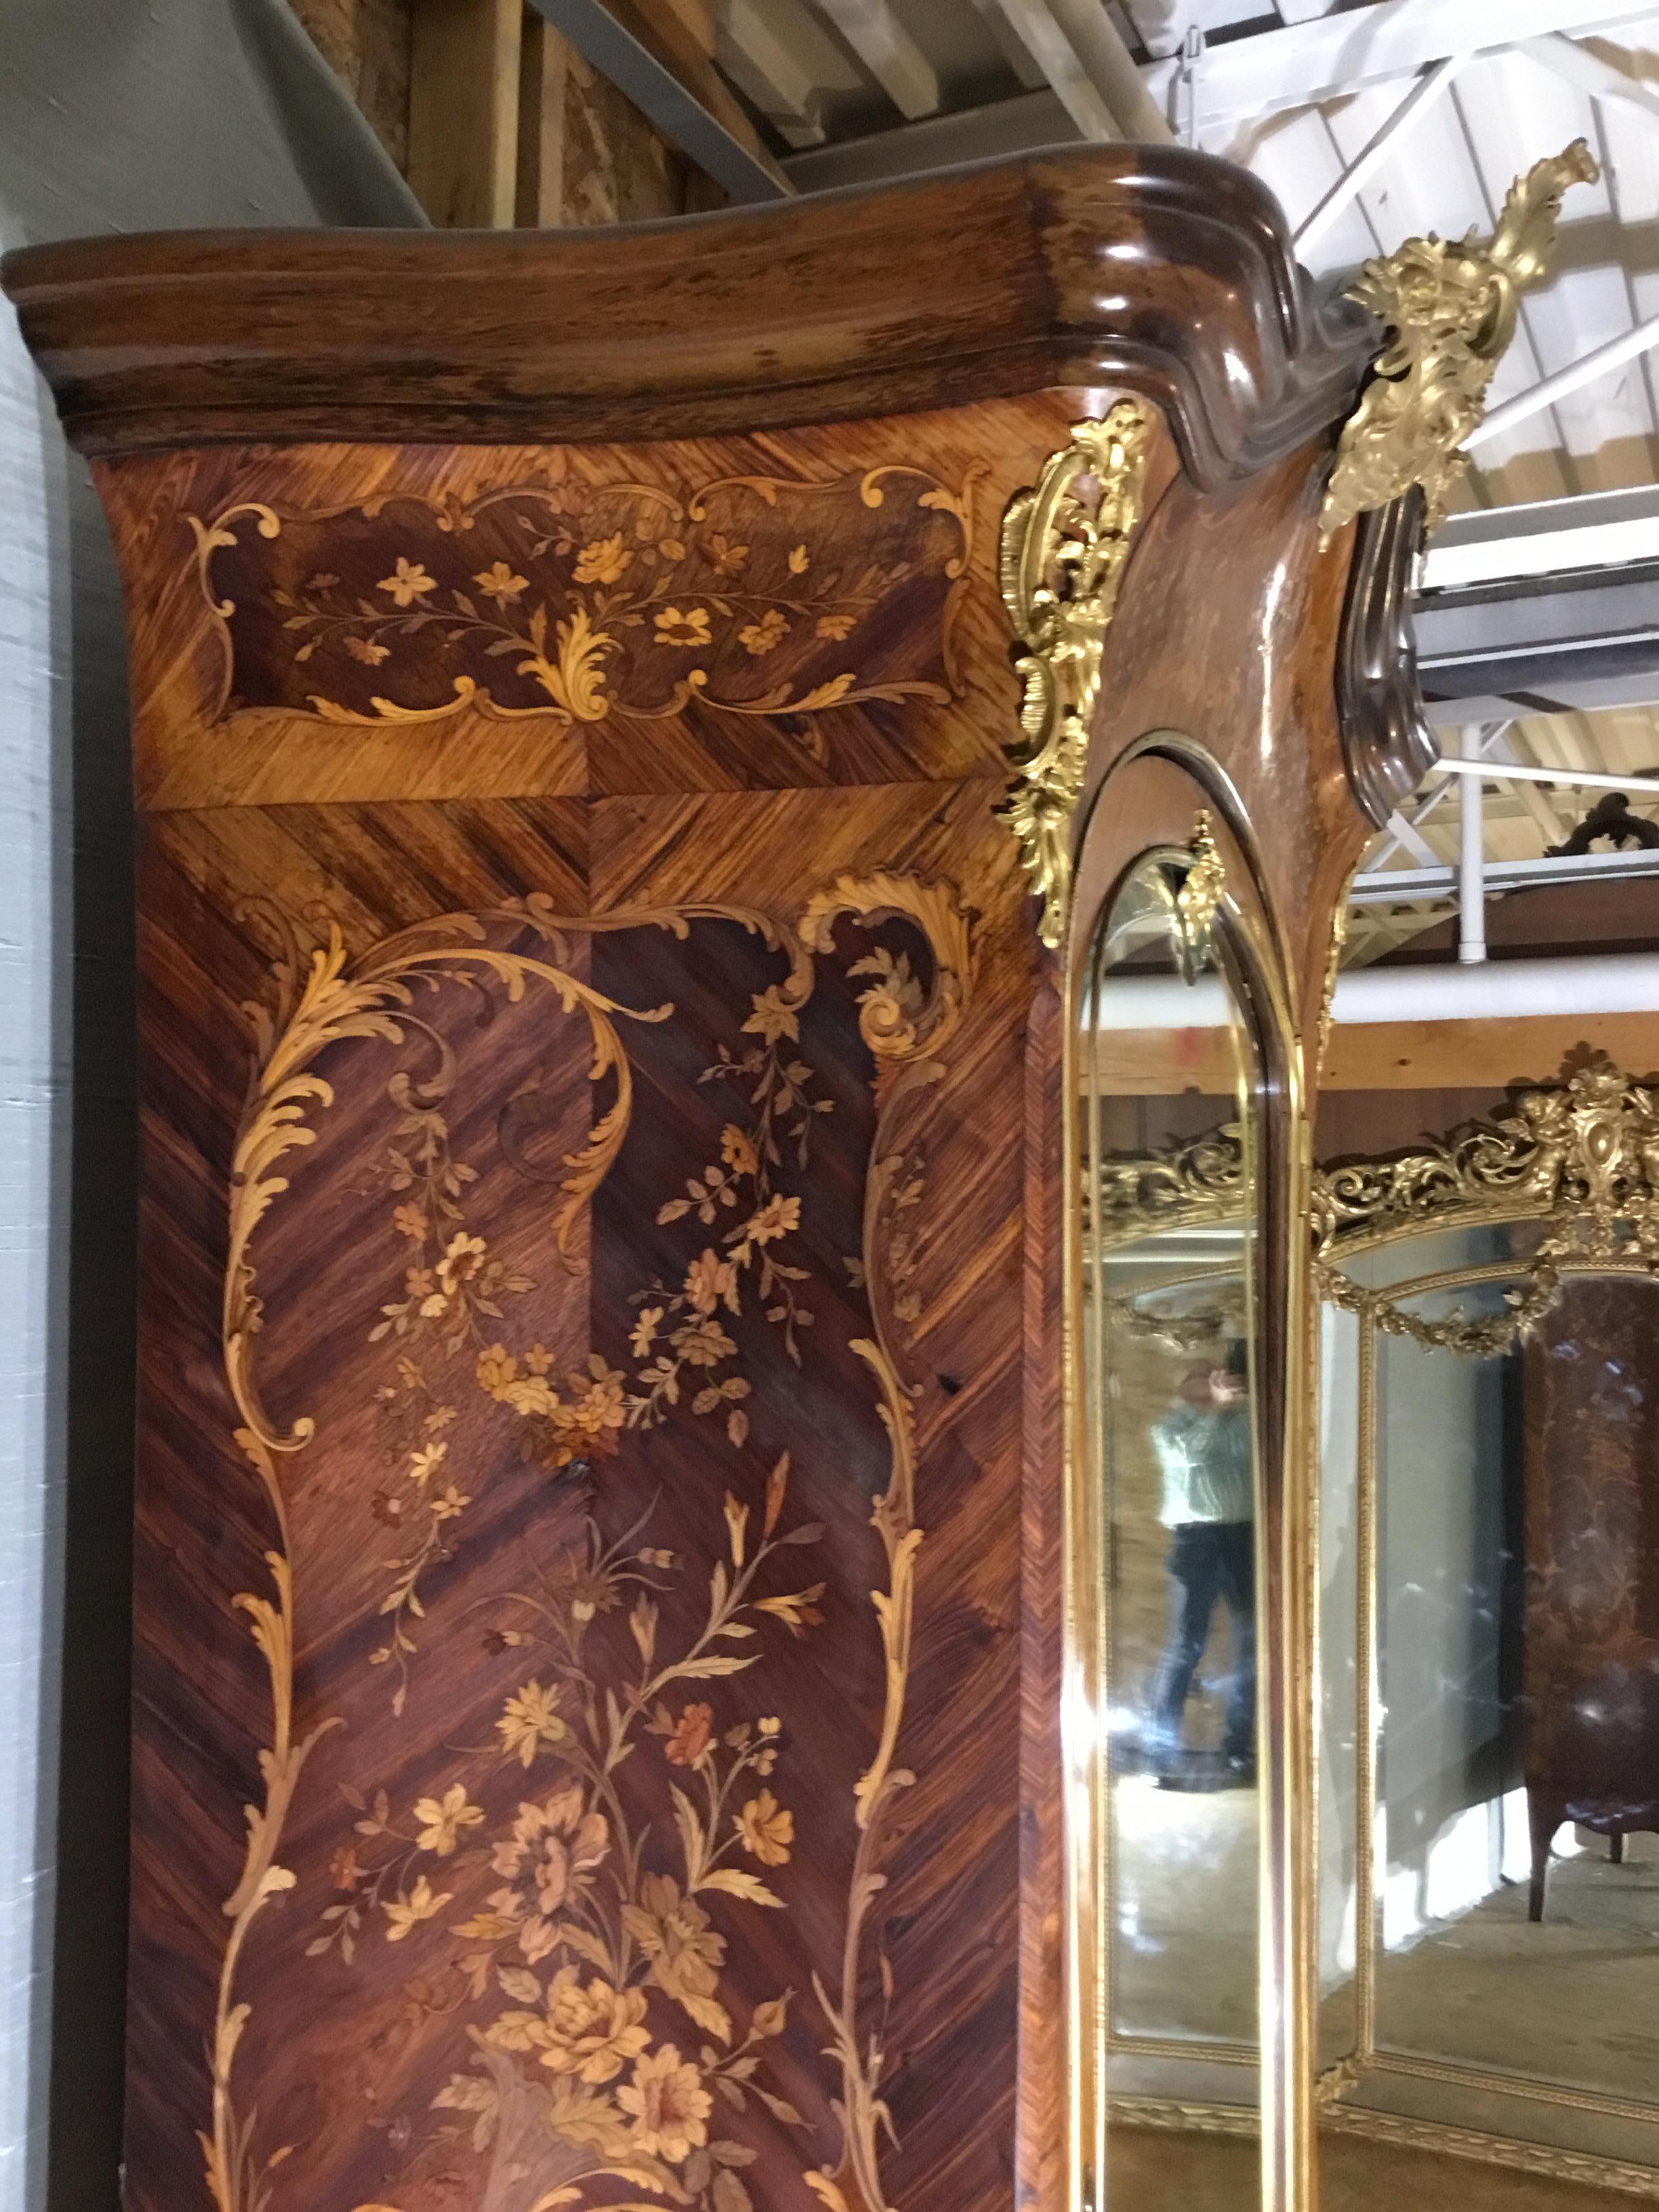 This elegant piece is a Louis XV gilt bronze mounted armoire in kingswood with fruitwood marquetry in vines and flowers on gilt bronze cuffed cabriolet legs.

This outstanding armoire is representative of the great craftsmanship demonstrated by